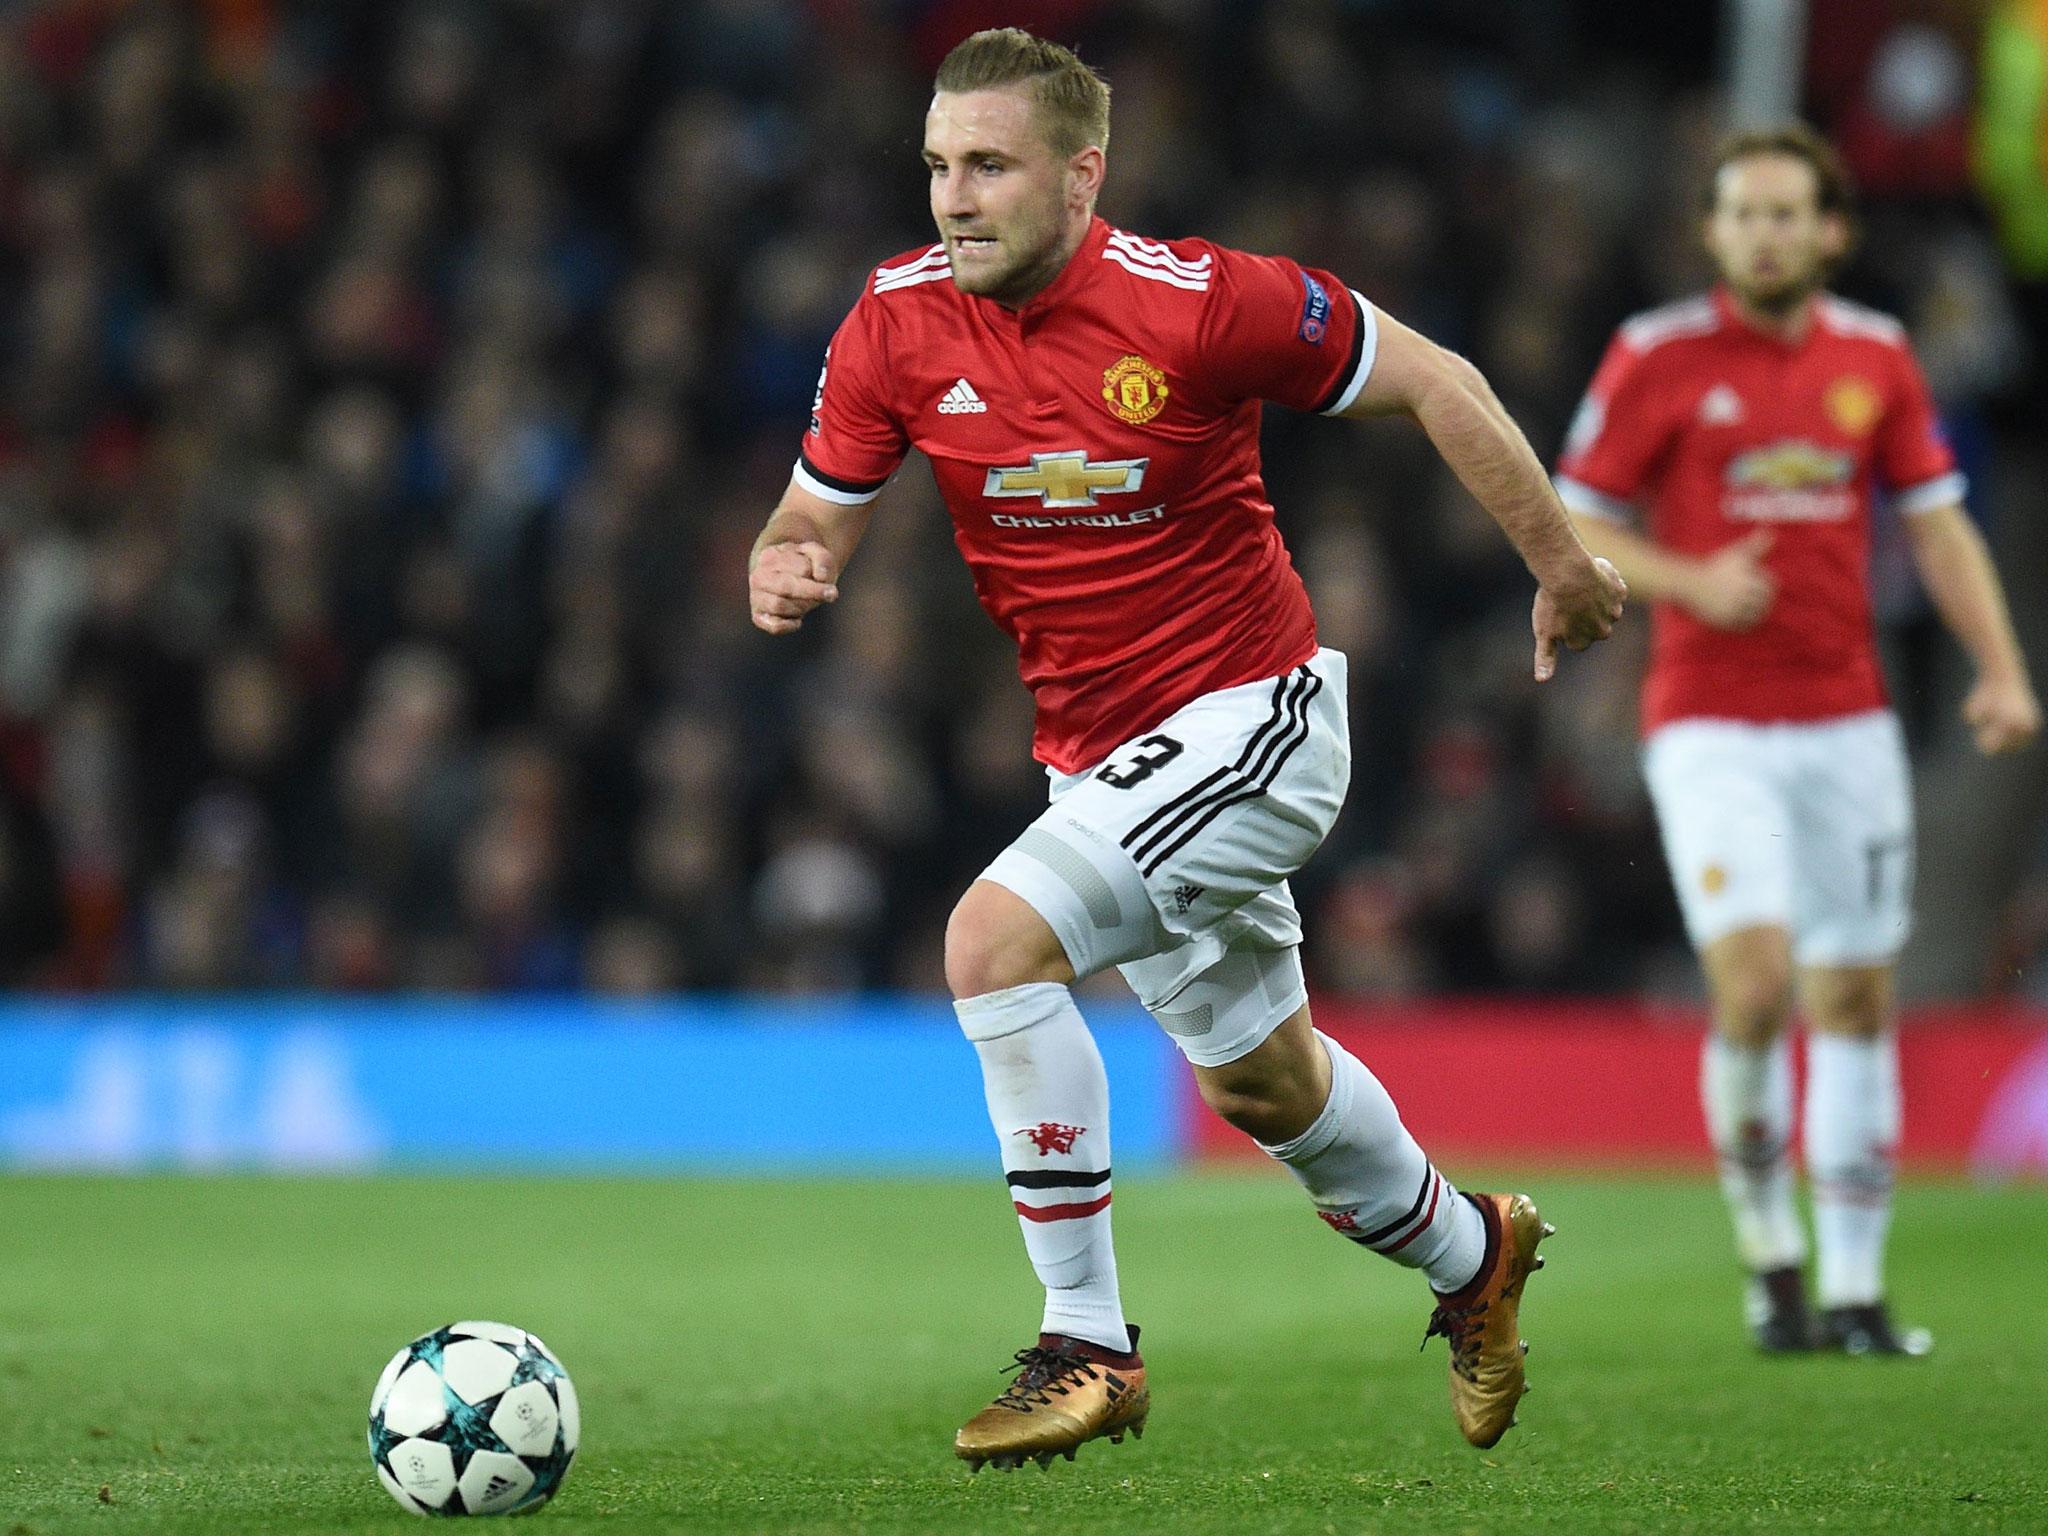 Luke Shaw in action for United against CSKA Moscow